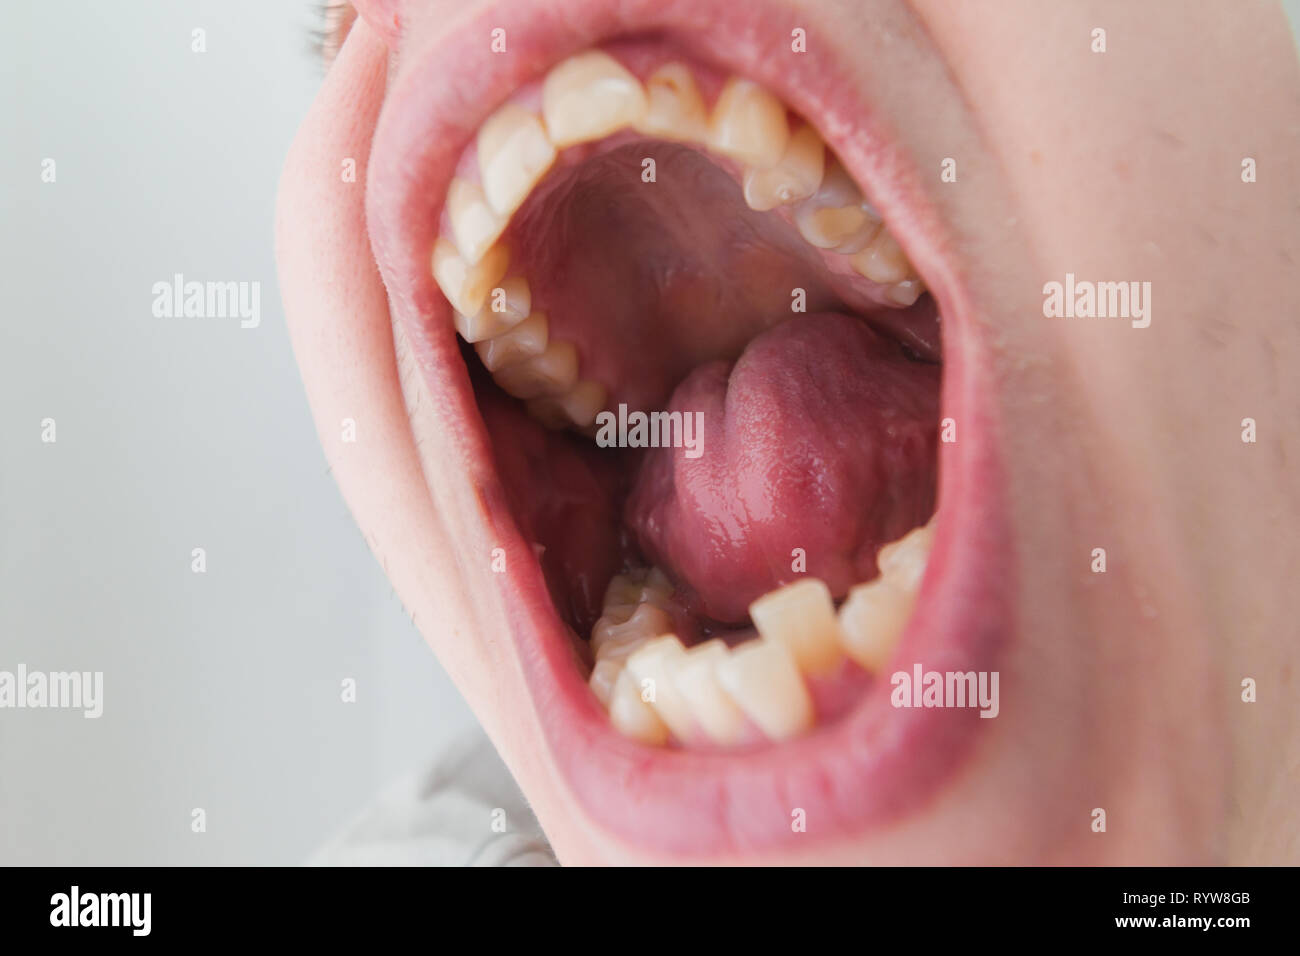 European male open mouth crooked yellow teeth dry lips Stock Photo